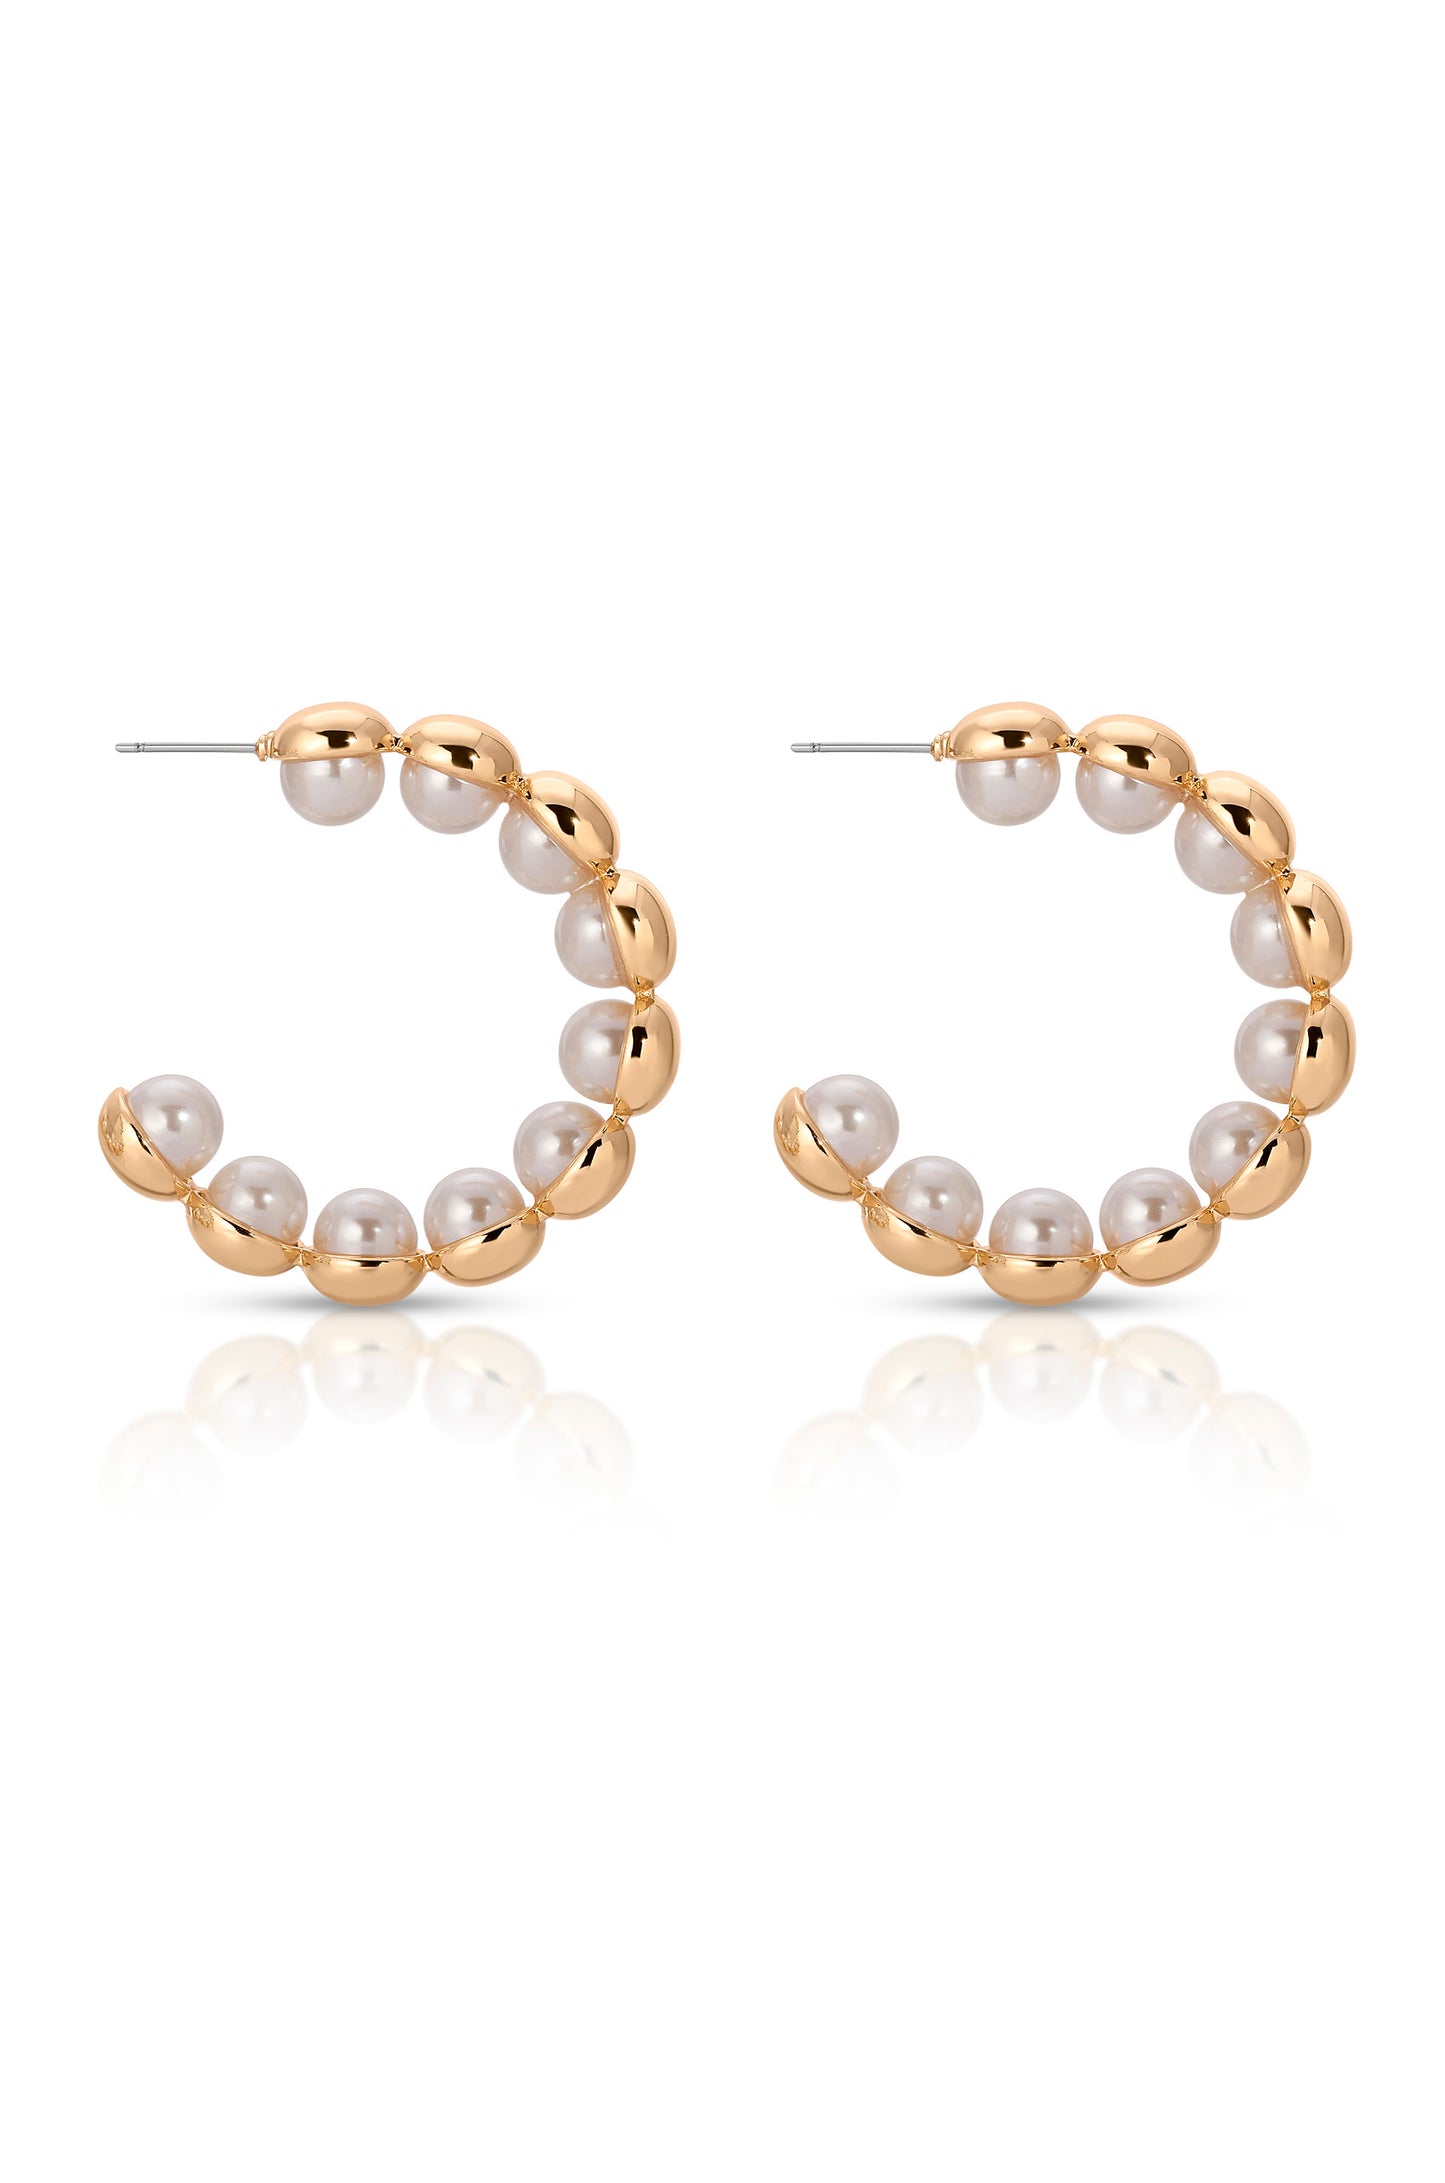 Pearl Inlay and Gold Hoop Earrings far side view